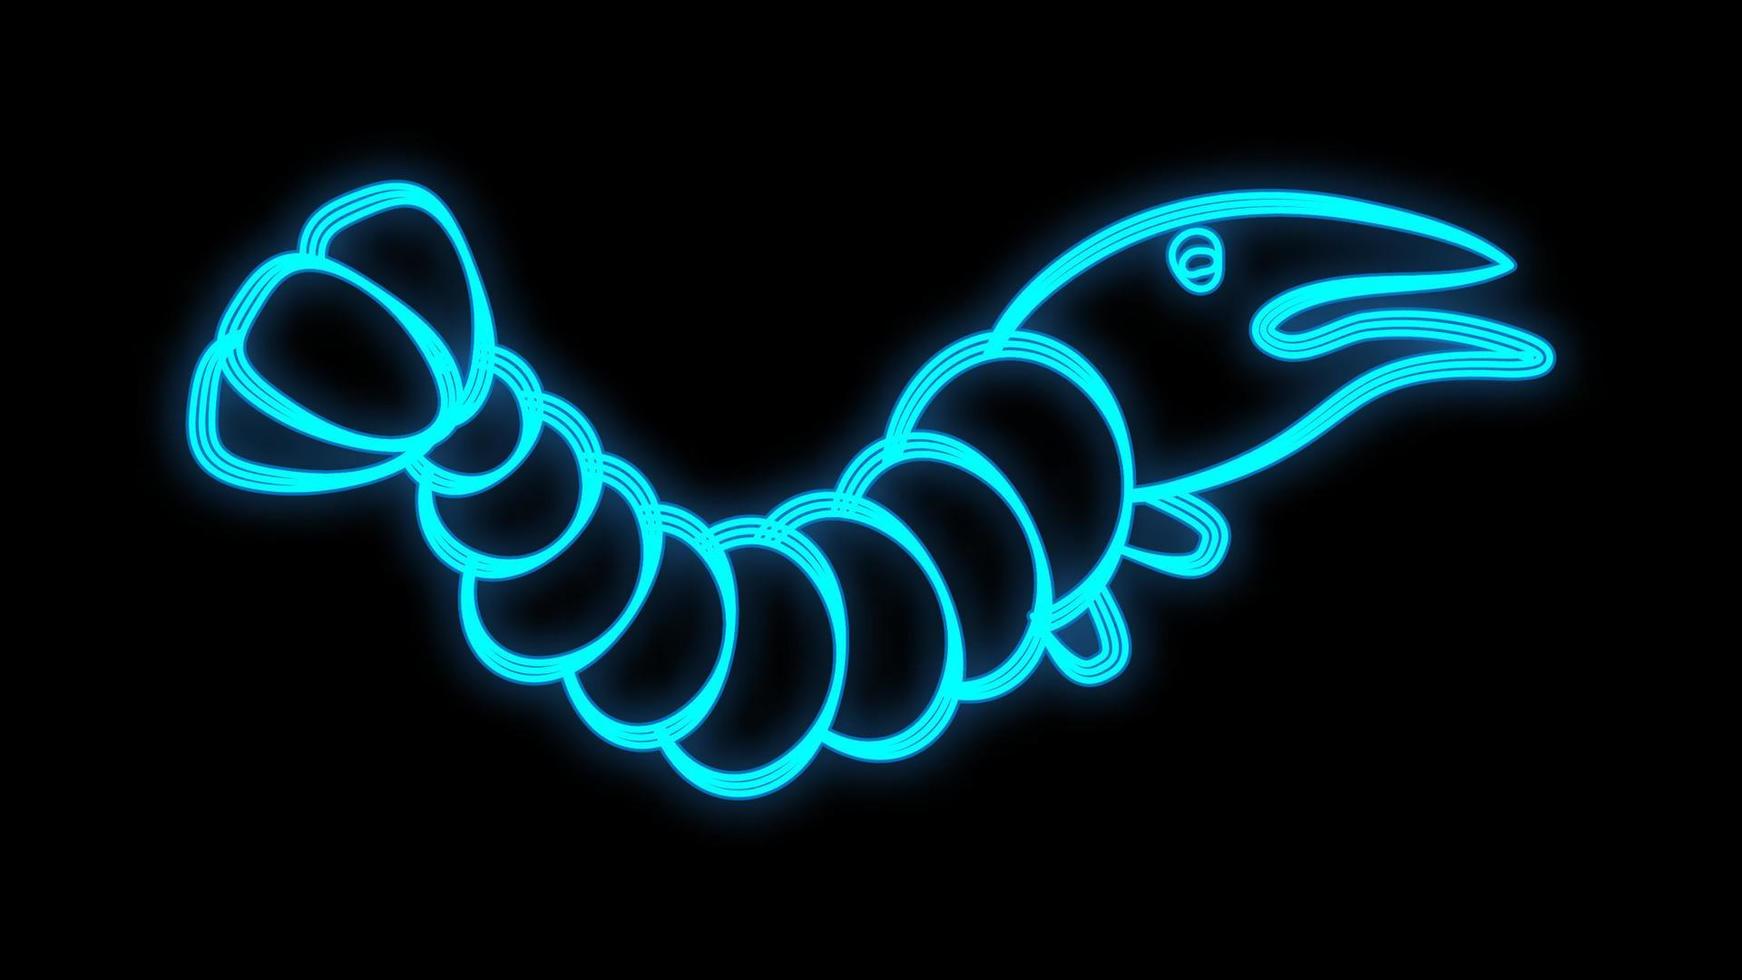 Shrimp Neon Light Glowing Vector Illustration Graphic Sign Bright with Dark Background